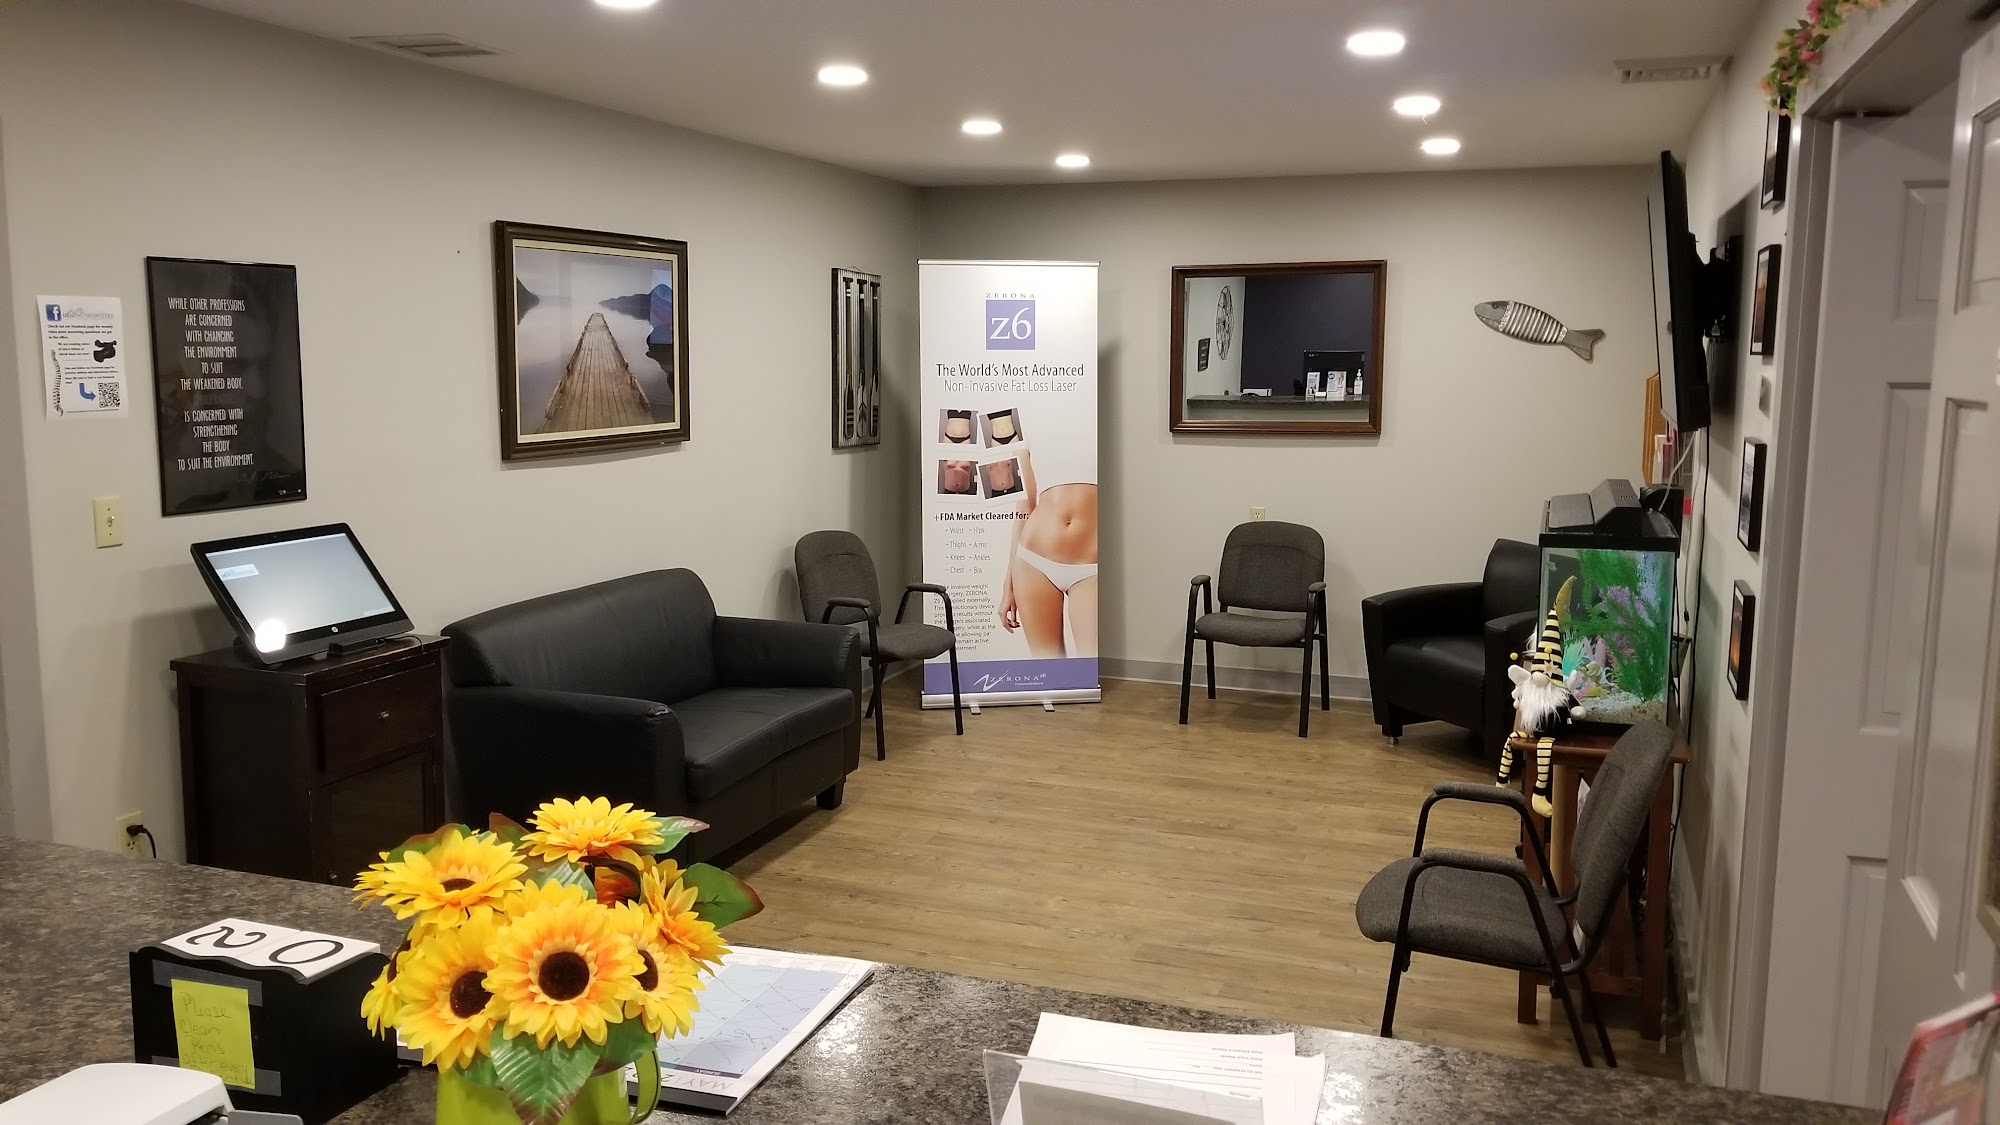 Healing Frontiers - A Chiropractic Wellness Center 26 Bay St, Wolfeboro New Hampshire 03894